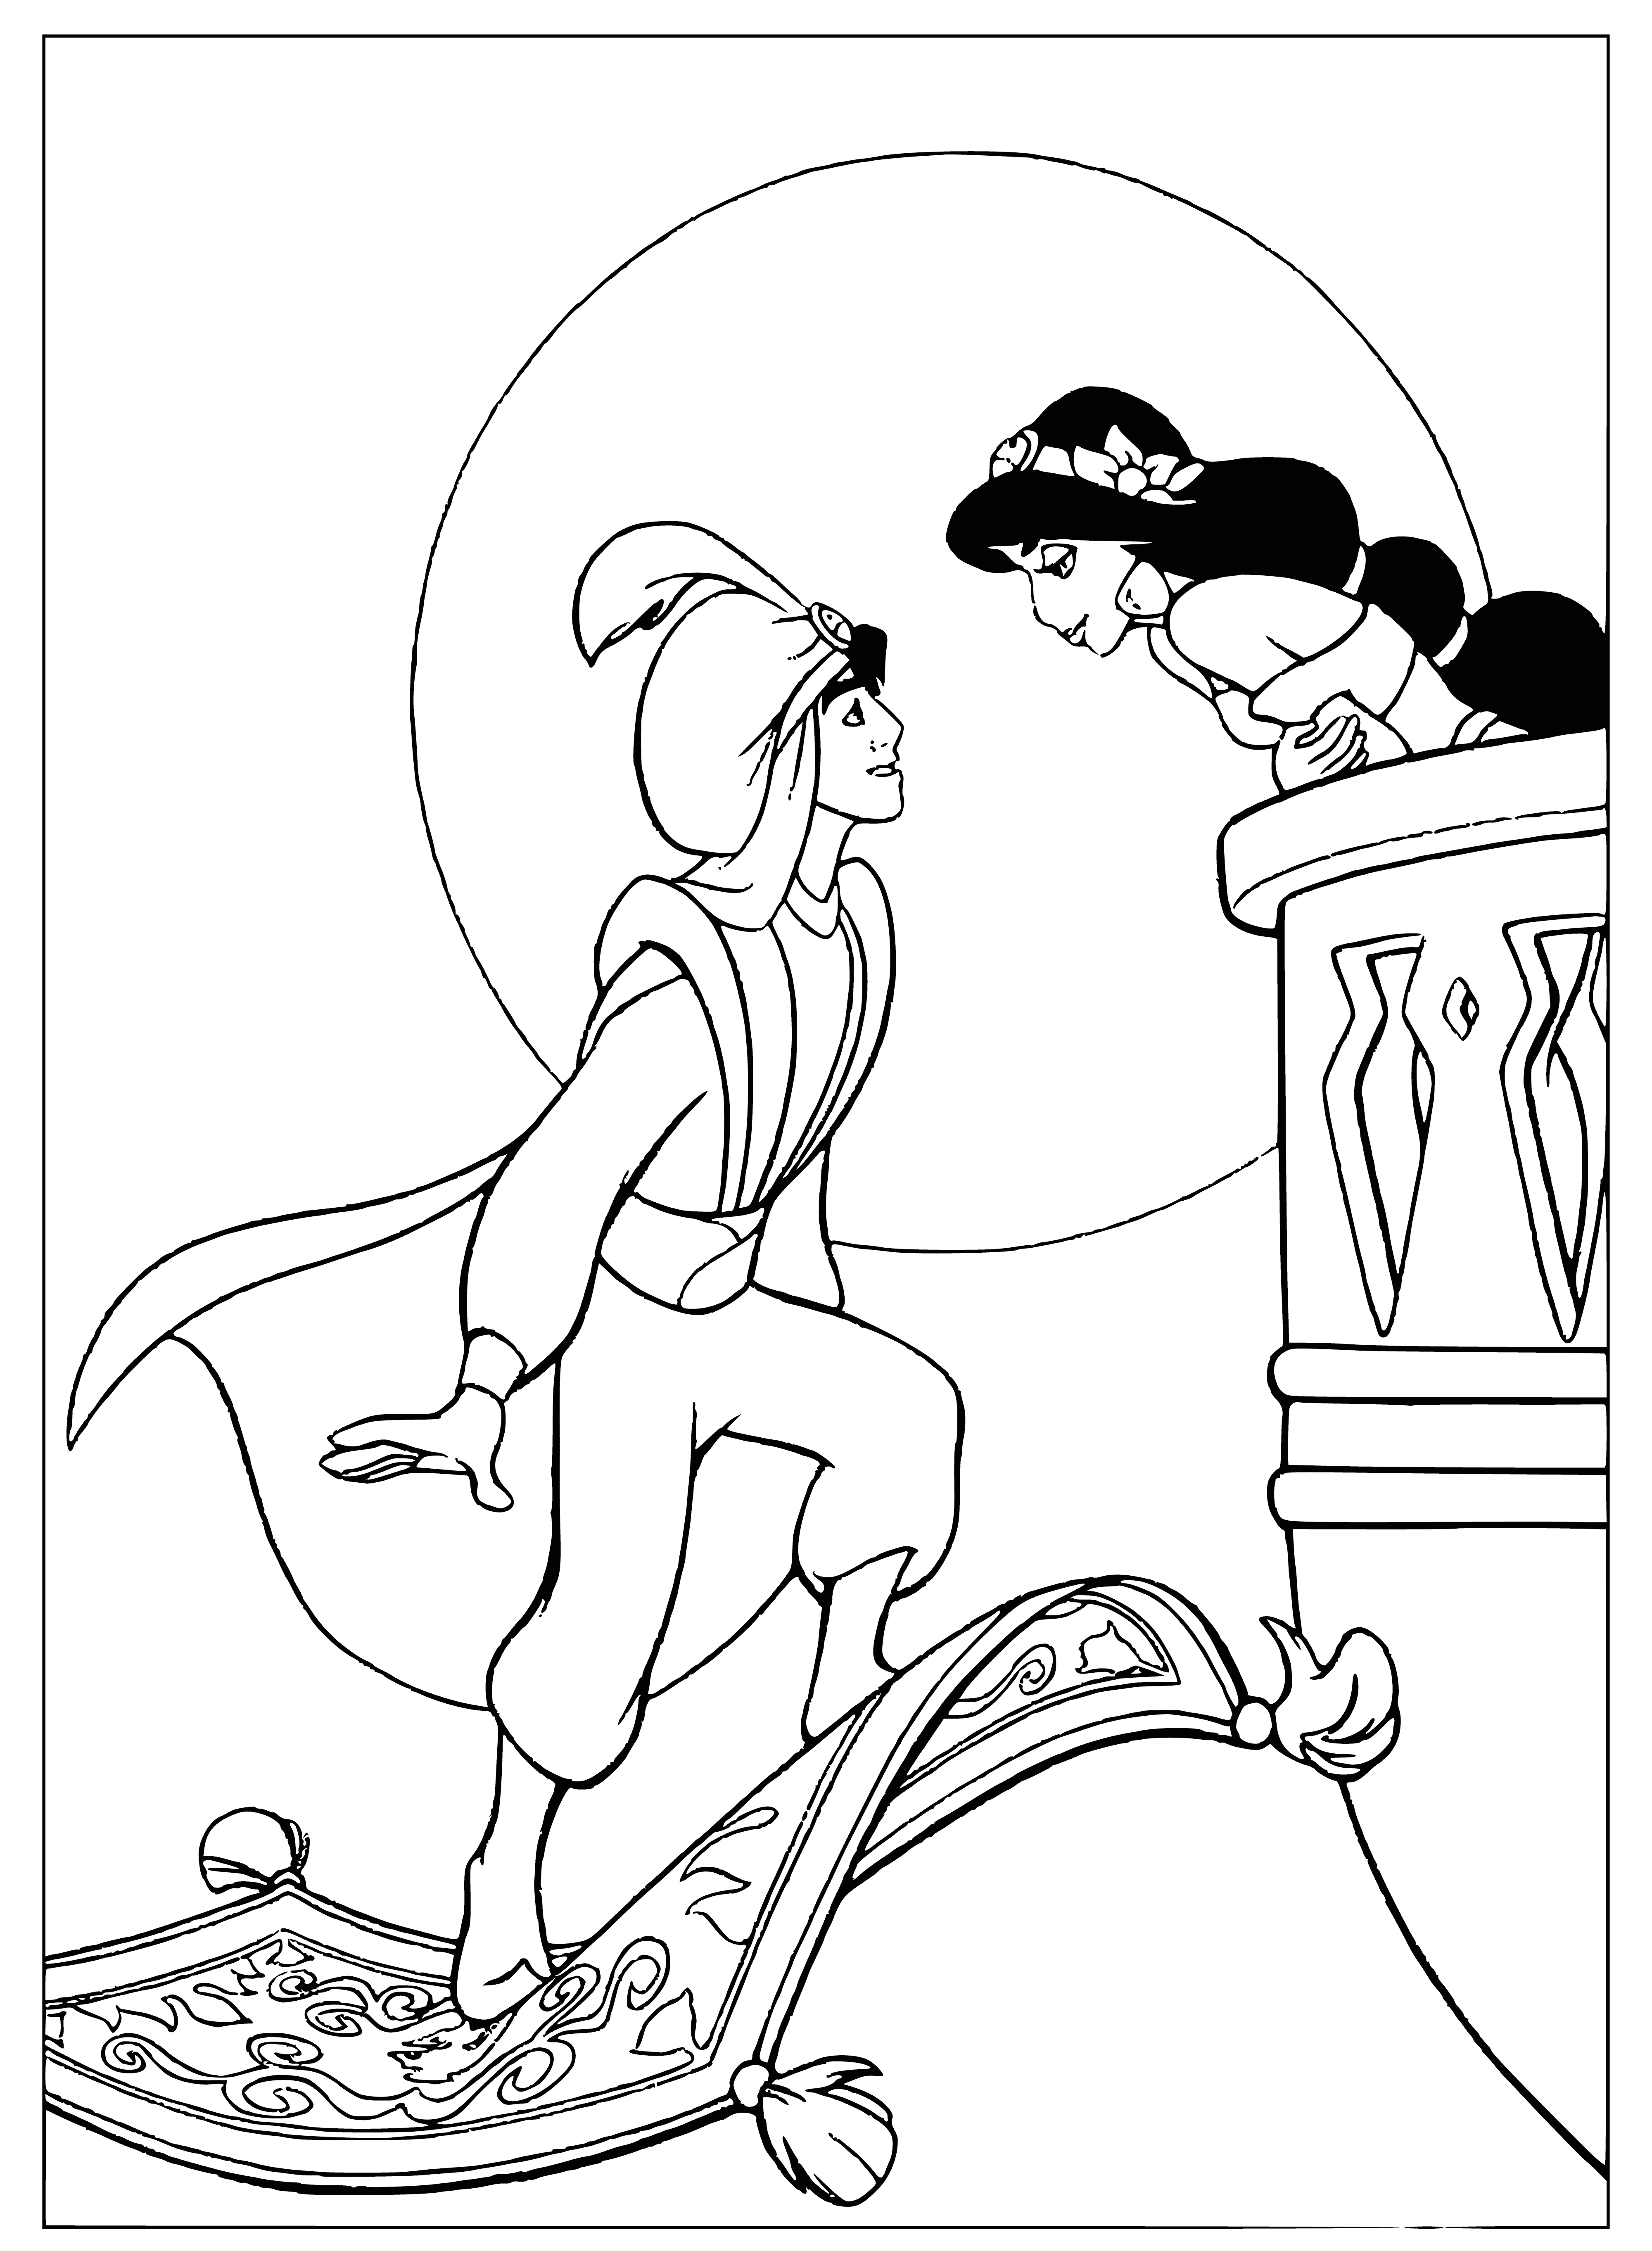 coloring page: Aladdin stands on a flying carpet, wearing a white outfit and black hair. Behind him, an Arabian palace stands, majestic with turrets and domes.